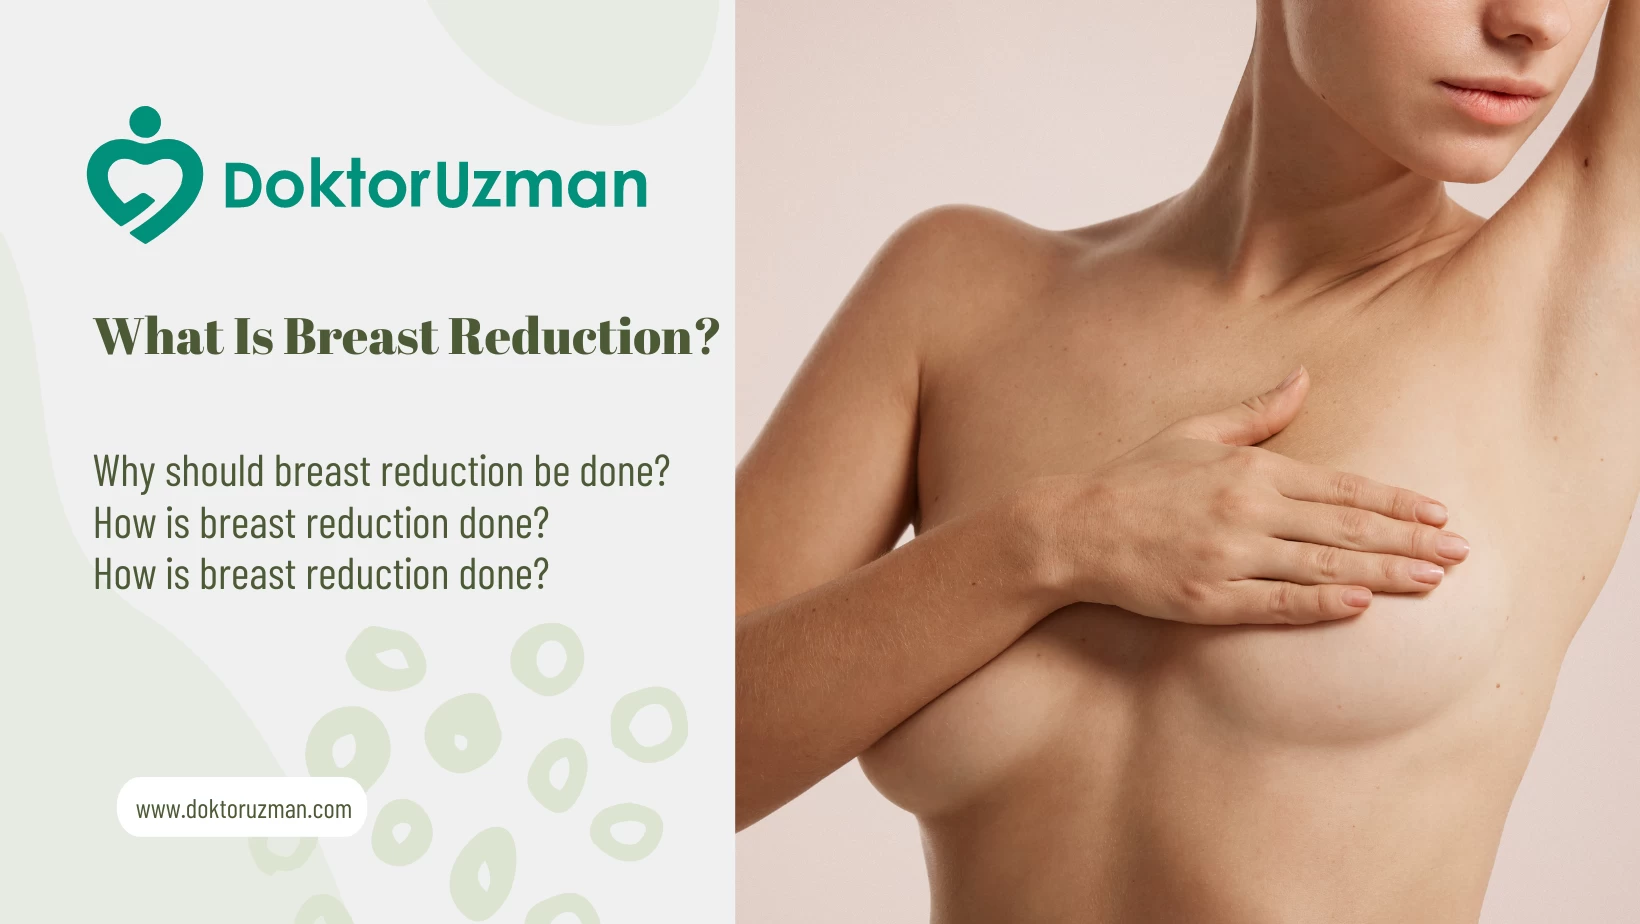 What is Breast Reduction?